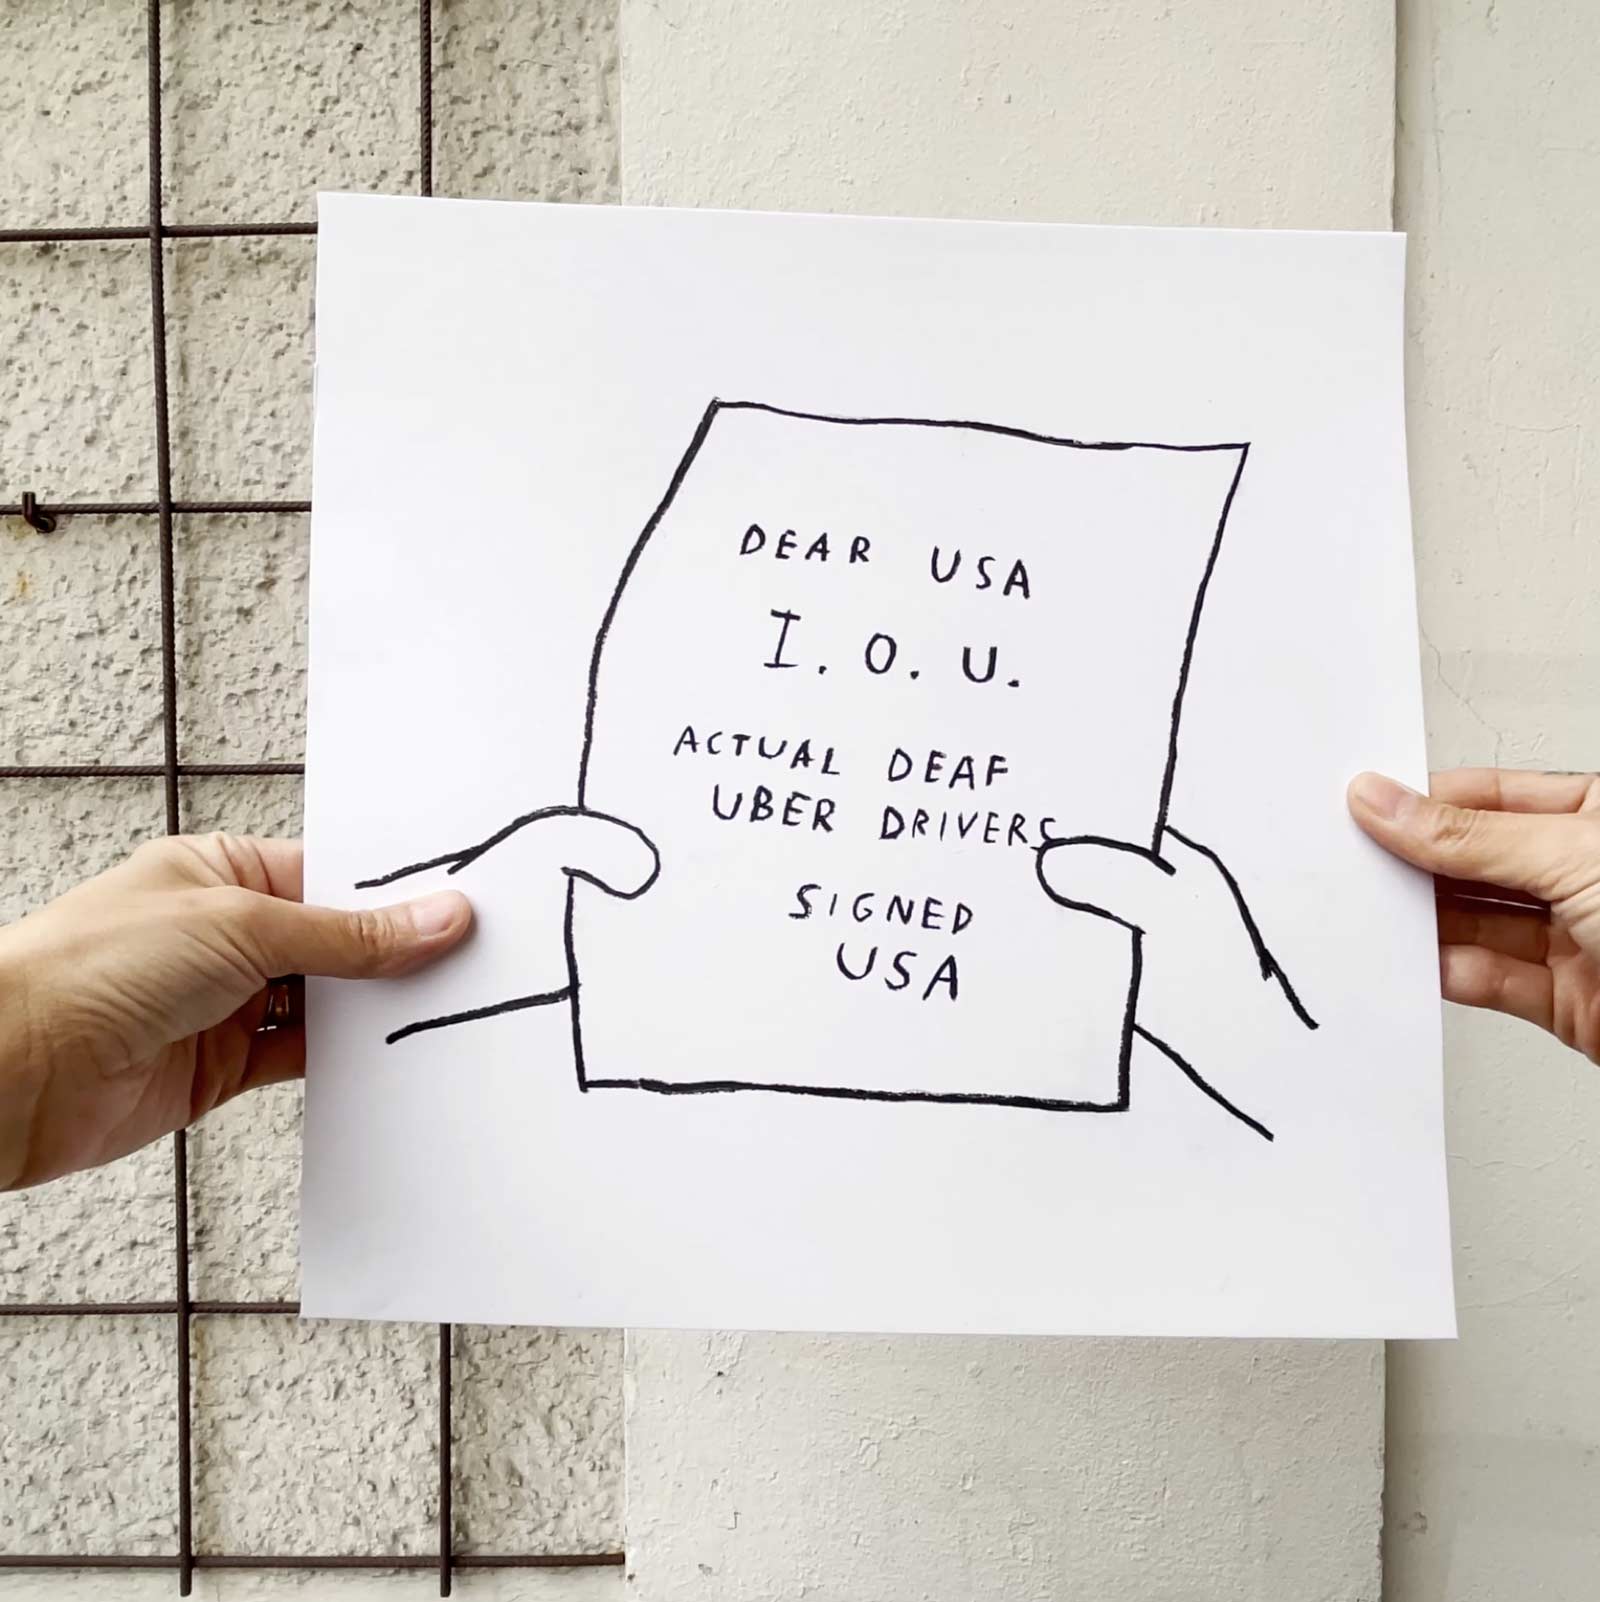 This still from IOU 4 USA depicts a square charcoal drawing held up by two hands. The drawing is of a frame from The Simpsons and shows an IOU note in Homer’s hands. The note reads: “DEAR USA I.O.U. ACTUAL DEAF UBER DRIVERS. SIGNED USA”.